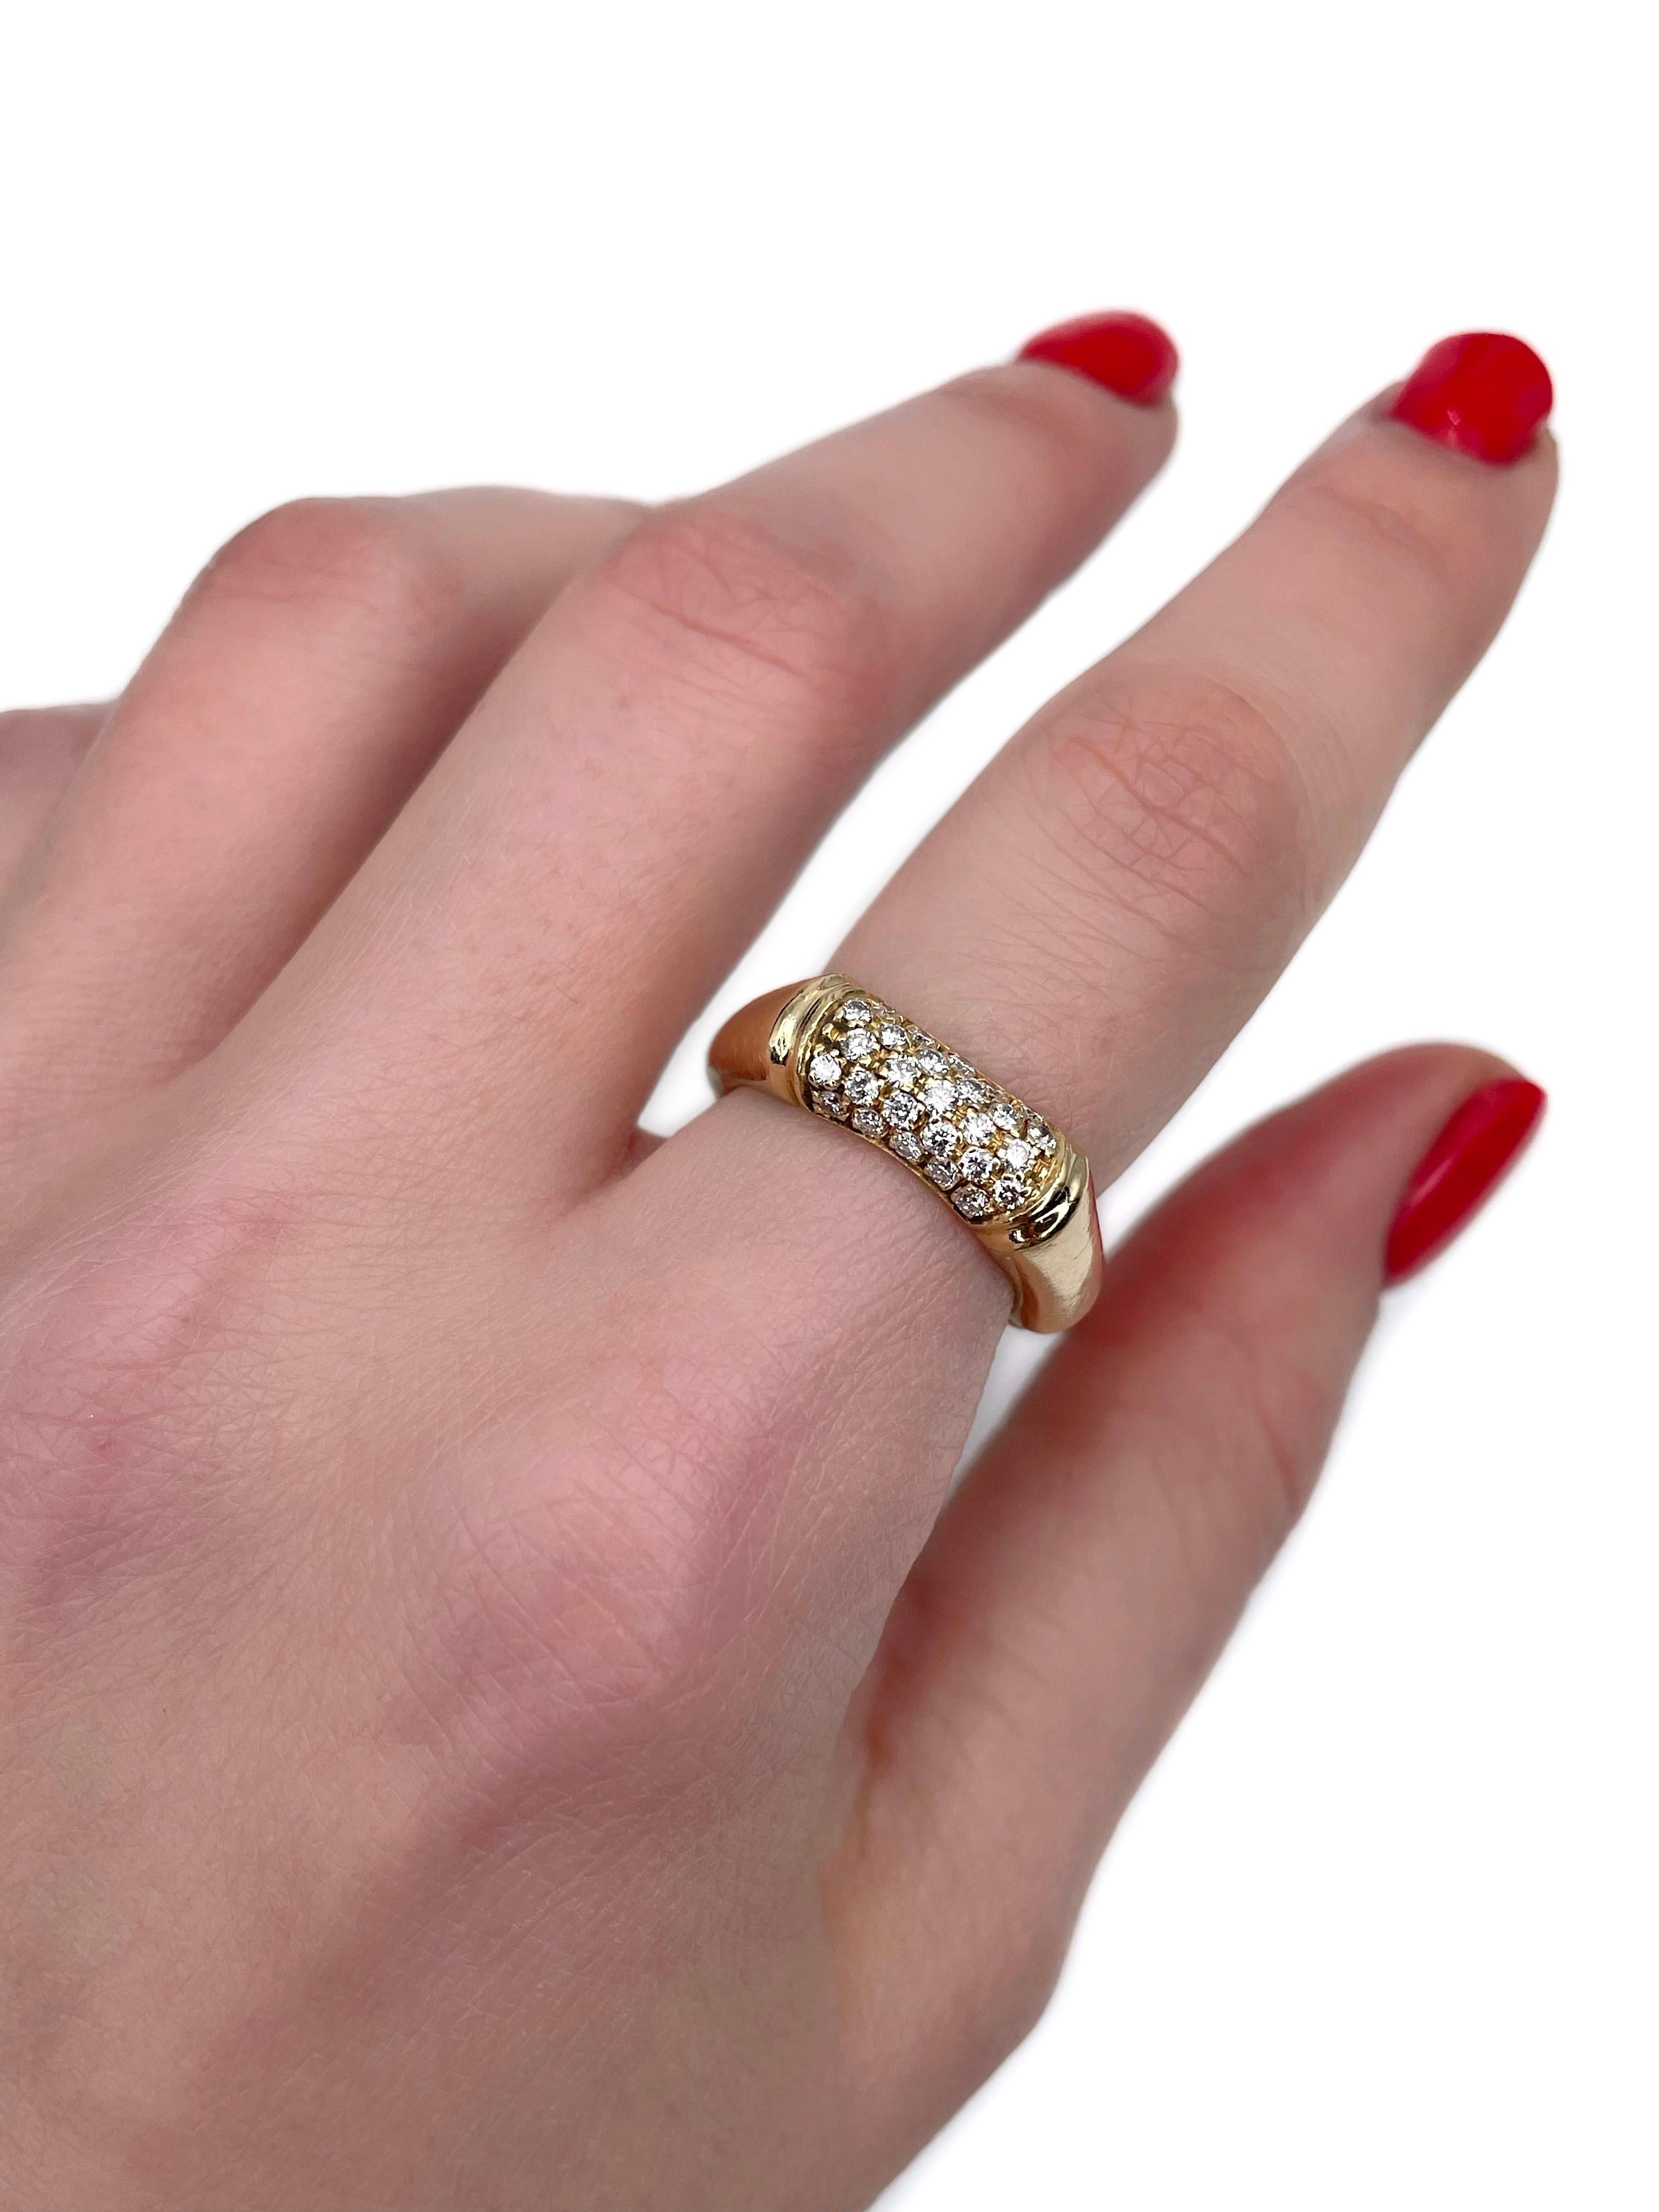 This is a bamboo design band ring crafted in 18K yellow gold. Circa 2000. 

The piece features 27 brilliant cut diamonds: TW ~0.40ct, RW+/W, VVS-VS. 

Weight: 5.25g 
Size: 16 (US 5.5)

IMPORTANT: please ask about the possibility to resize before